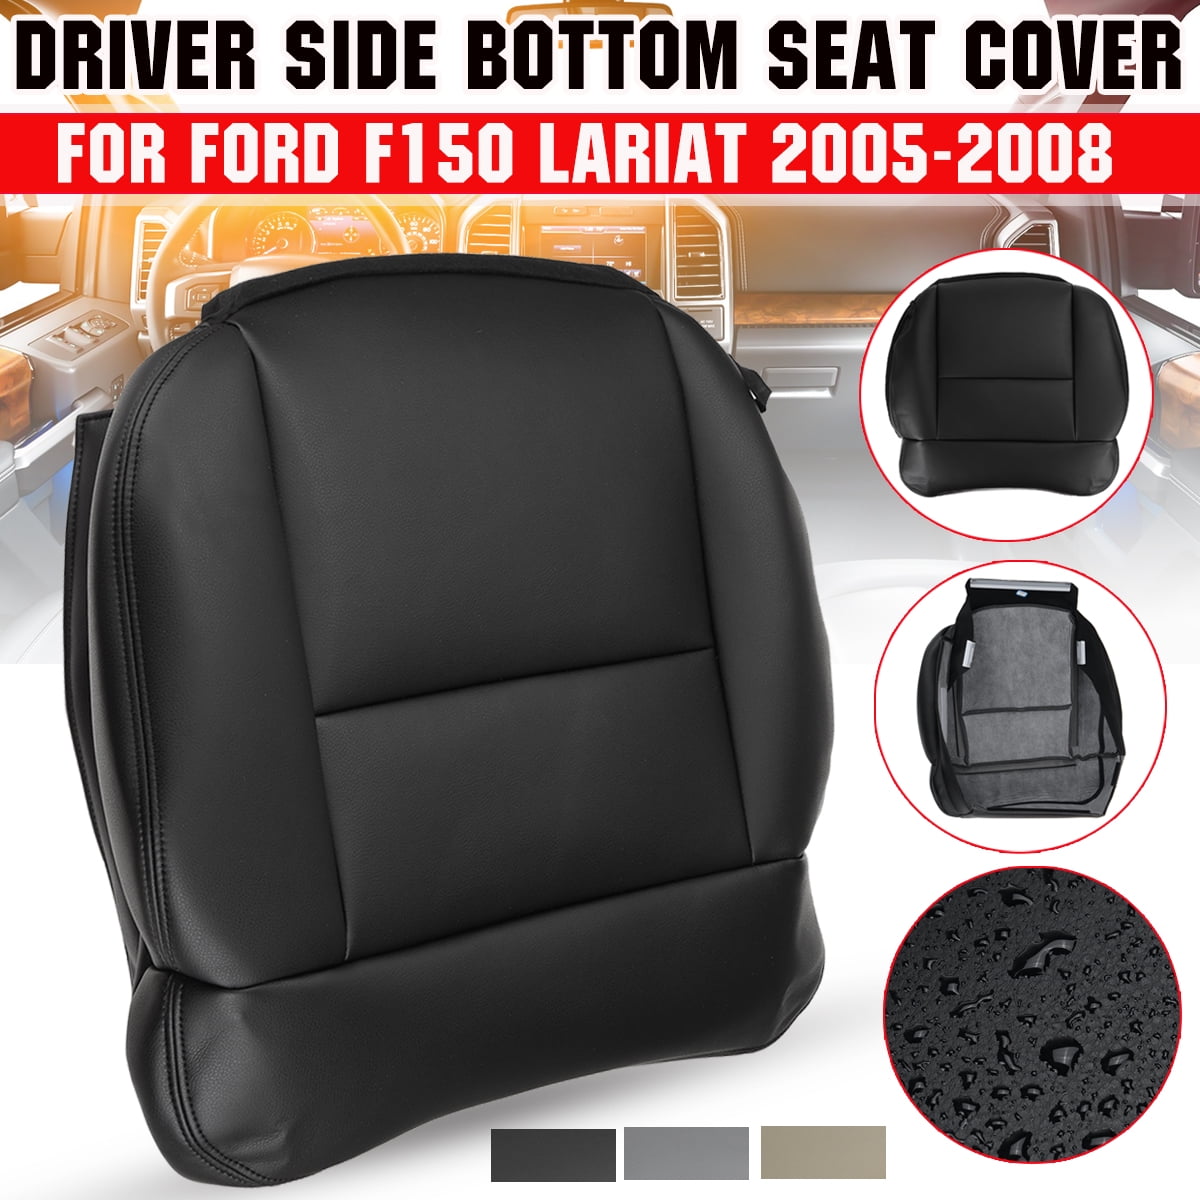 Driver Bottom Seat Cover Fit for 2004-2008 Ford F-150 Lariat XLT Black Leather